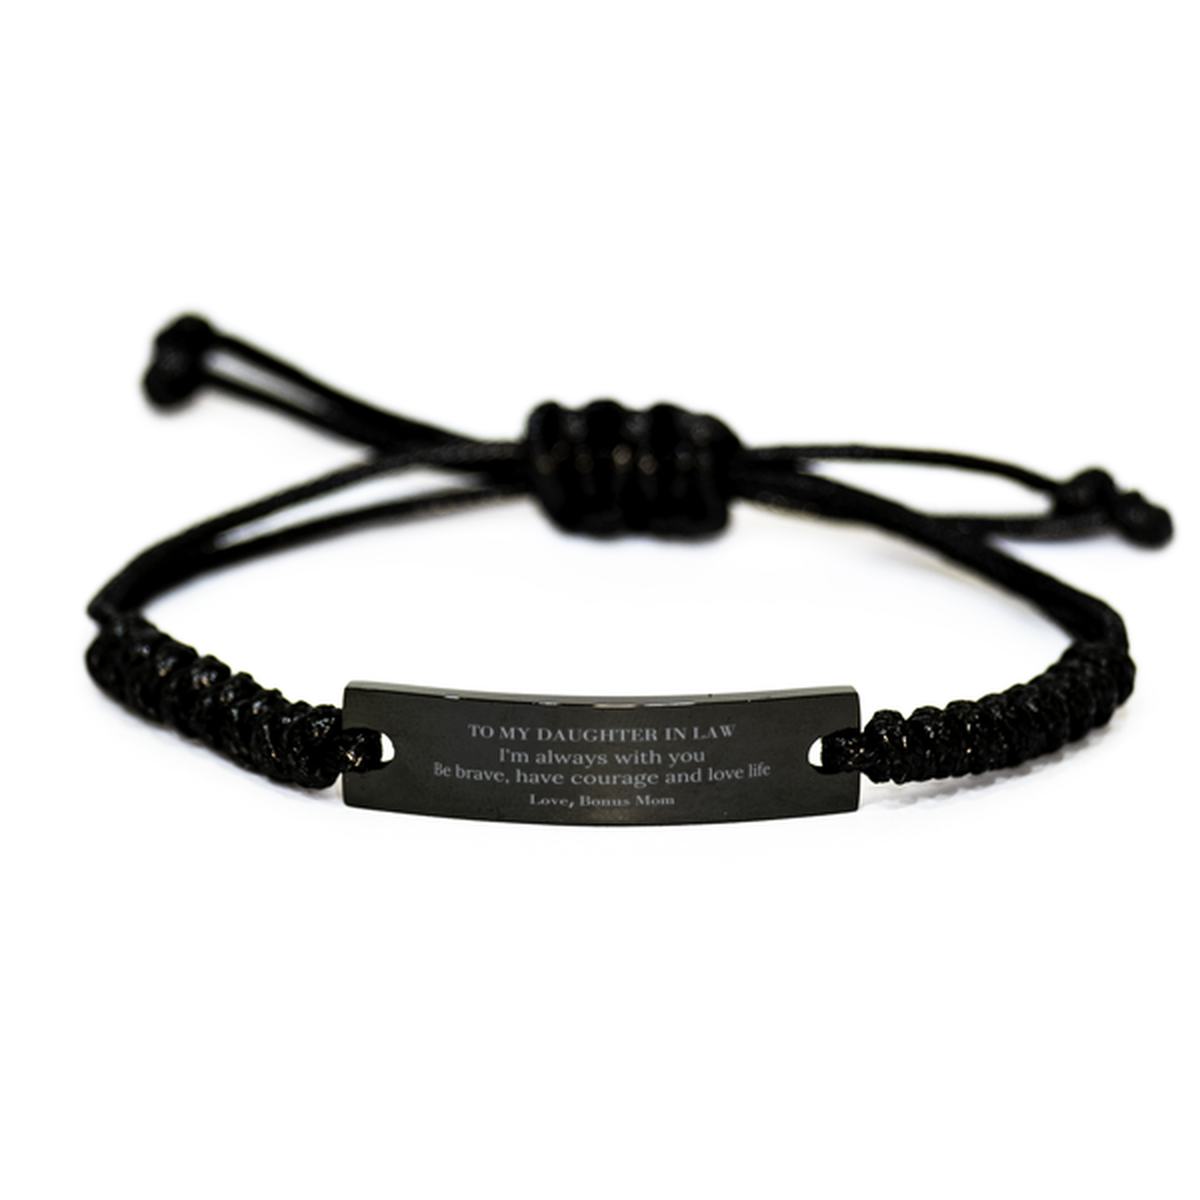 To My Daughter In Law Gifts from Bonus Mom, Unique Black Rope Bracelet Inspirational Christmas Birthday Graduation Gifts for Daughter In Law I'm always with you. Be brave, have courage and love life. Love, Bonus Mom